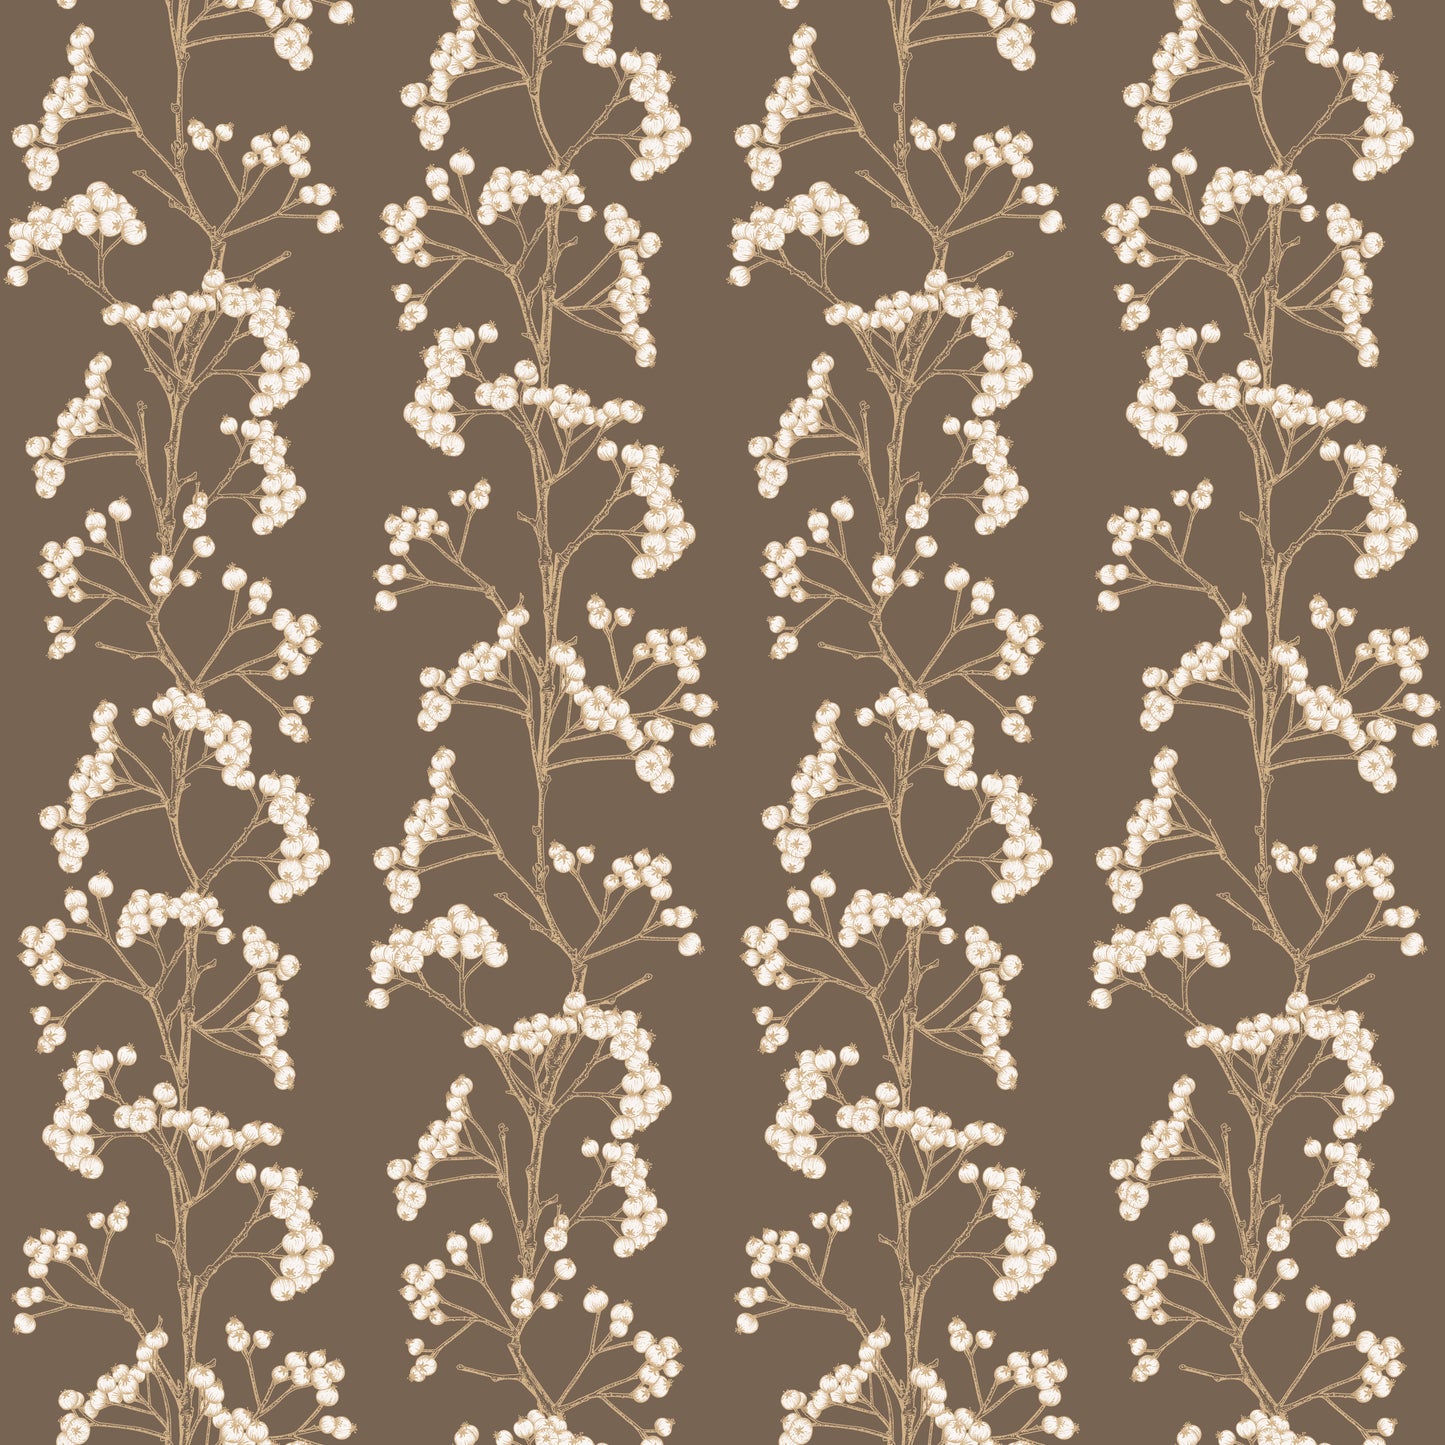 White firethorns print on brown background easy to install and remove peel and stick custom wallpaper available in different lengths/sizes locally created and printed in Canada. Removable, washable, durable, commercial grade, customizable and water proof.